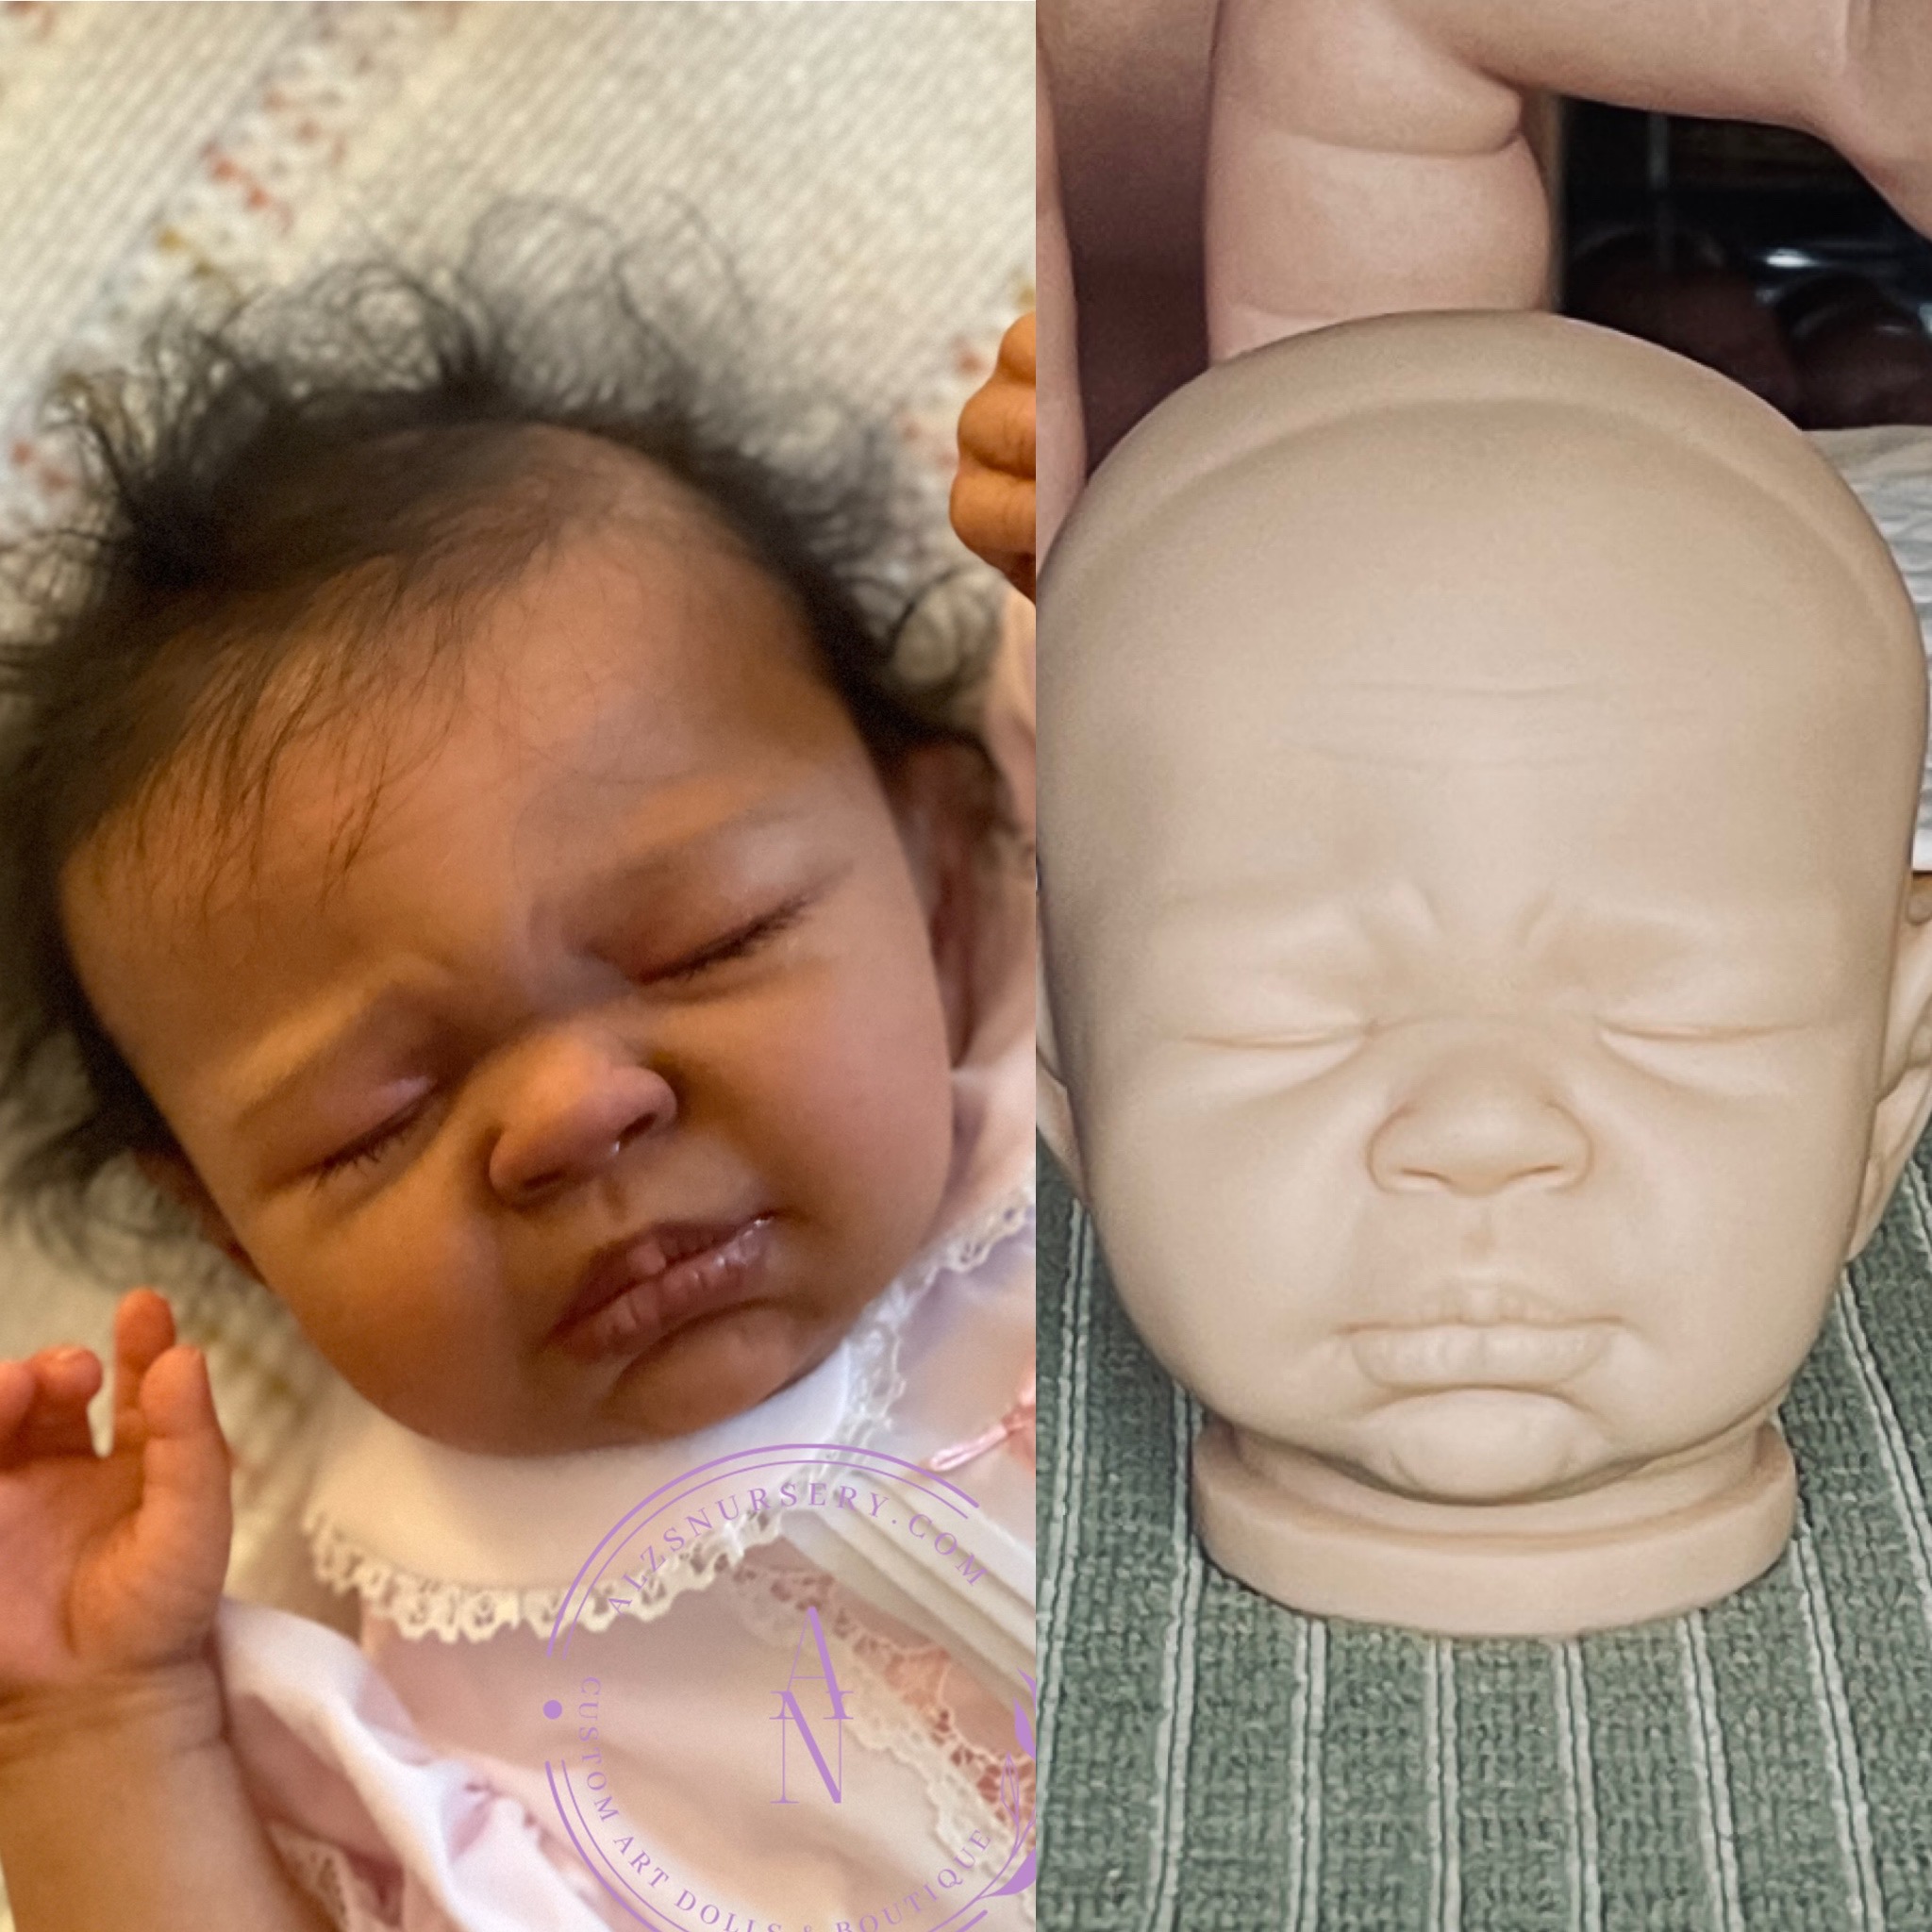 LE Renner sculpt by Dawn McLeod, brought to life by Ginger Kelly with Alz’s Nursery